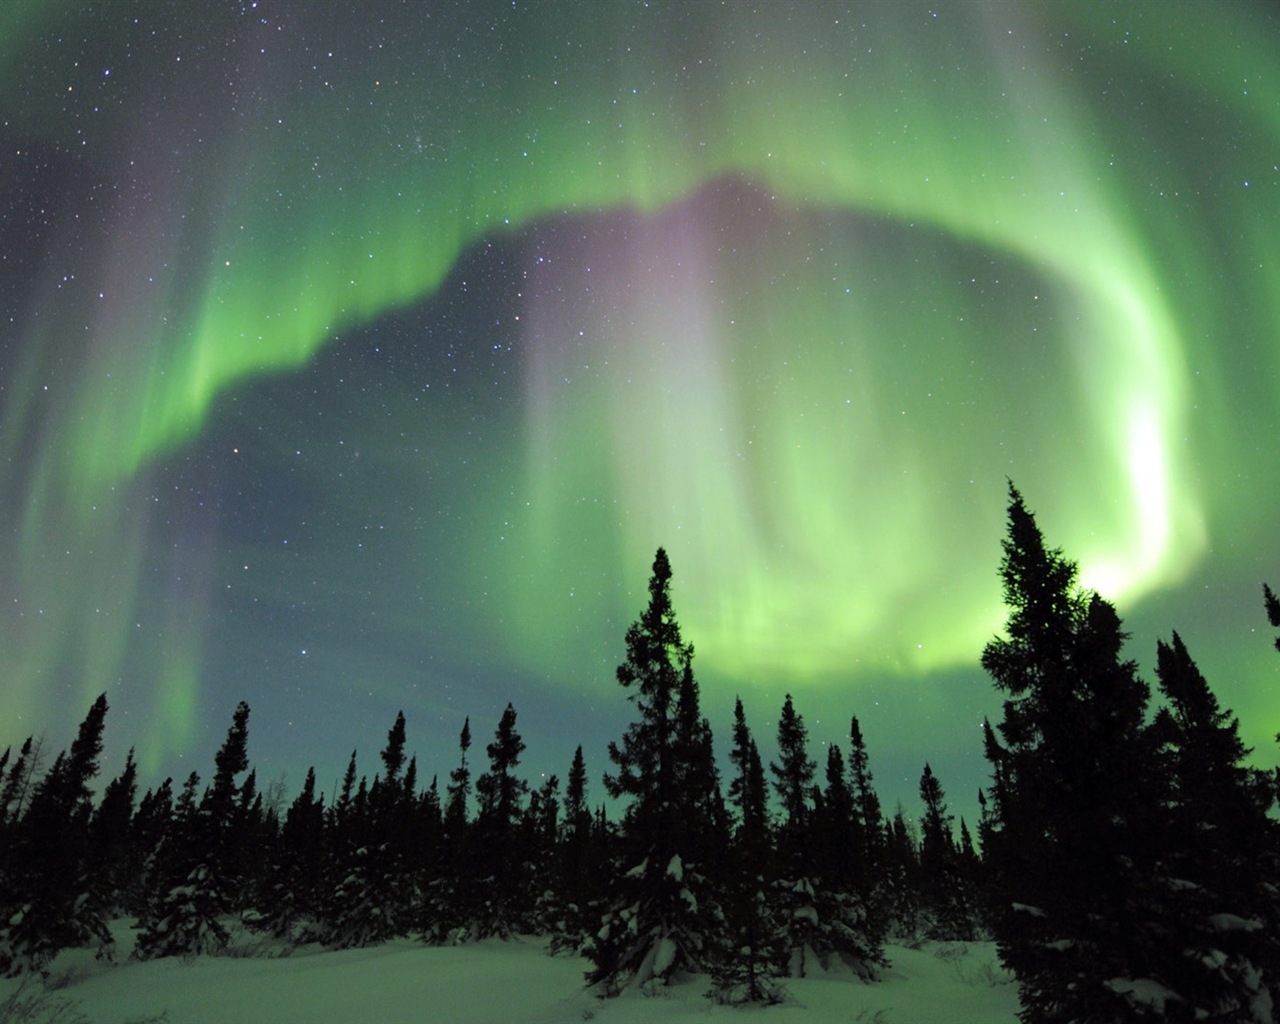 Natural wonders of the Northern Lights HD Wallpaper (2) #9 - 1280x1024